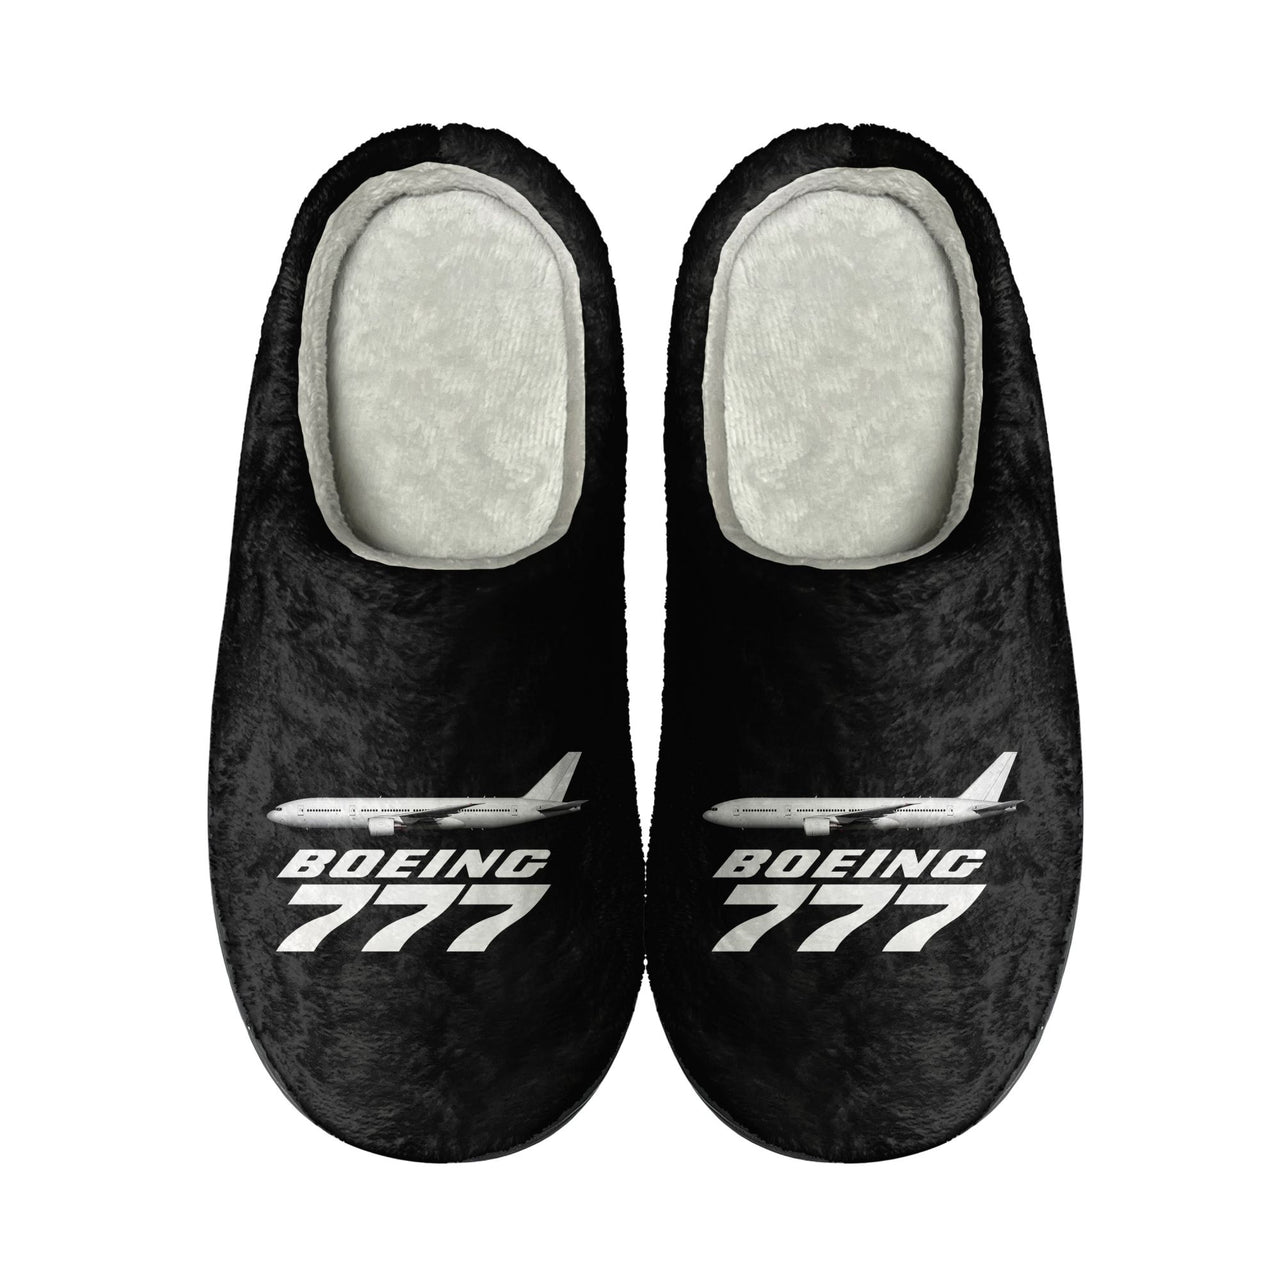 The Boeing 777 Designed Cotton Slippers